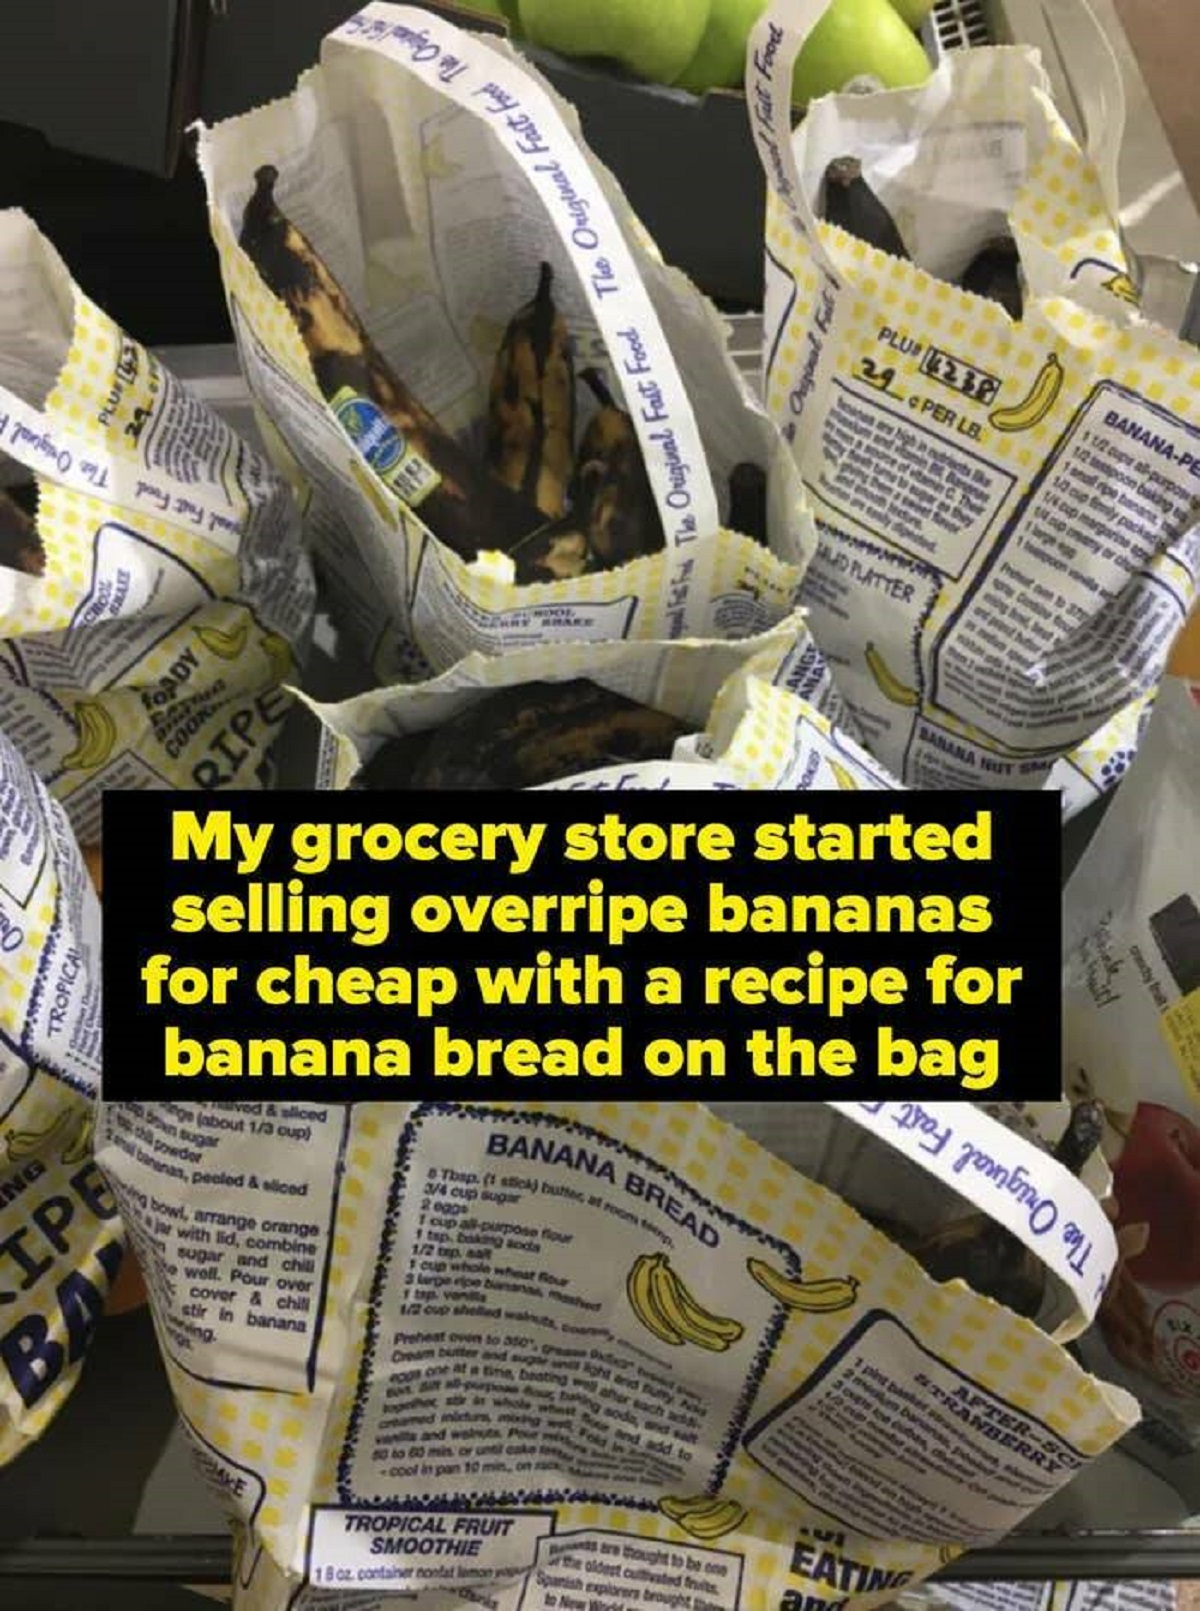 grocery store banana - Ng The Ougal Fat Food The Original Felt fand The C Plup Exte Ripe My grocery store started selling overripe bananas for cheap with a recipe for banana bread on the bag Banana Bread O Ipe Ba Tropical Fruit Smoothie and Eating S